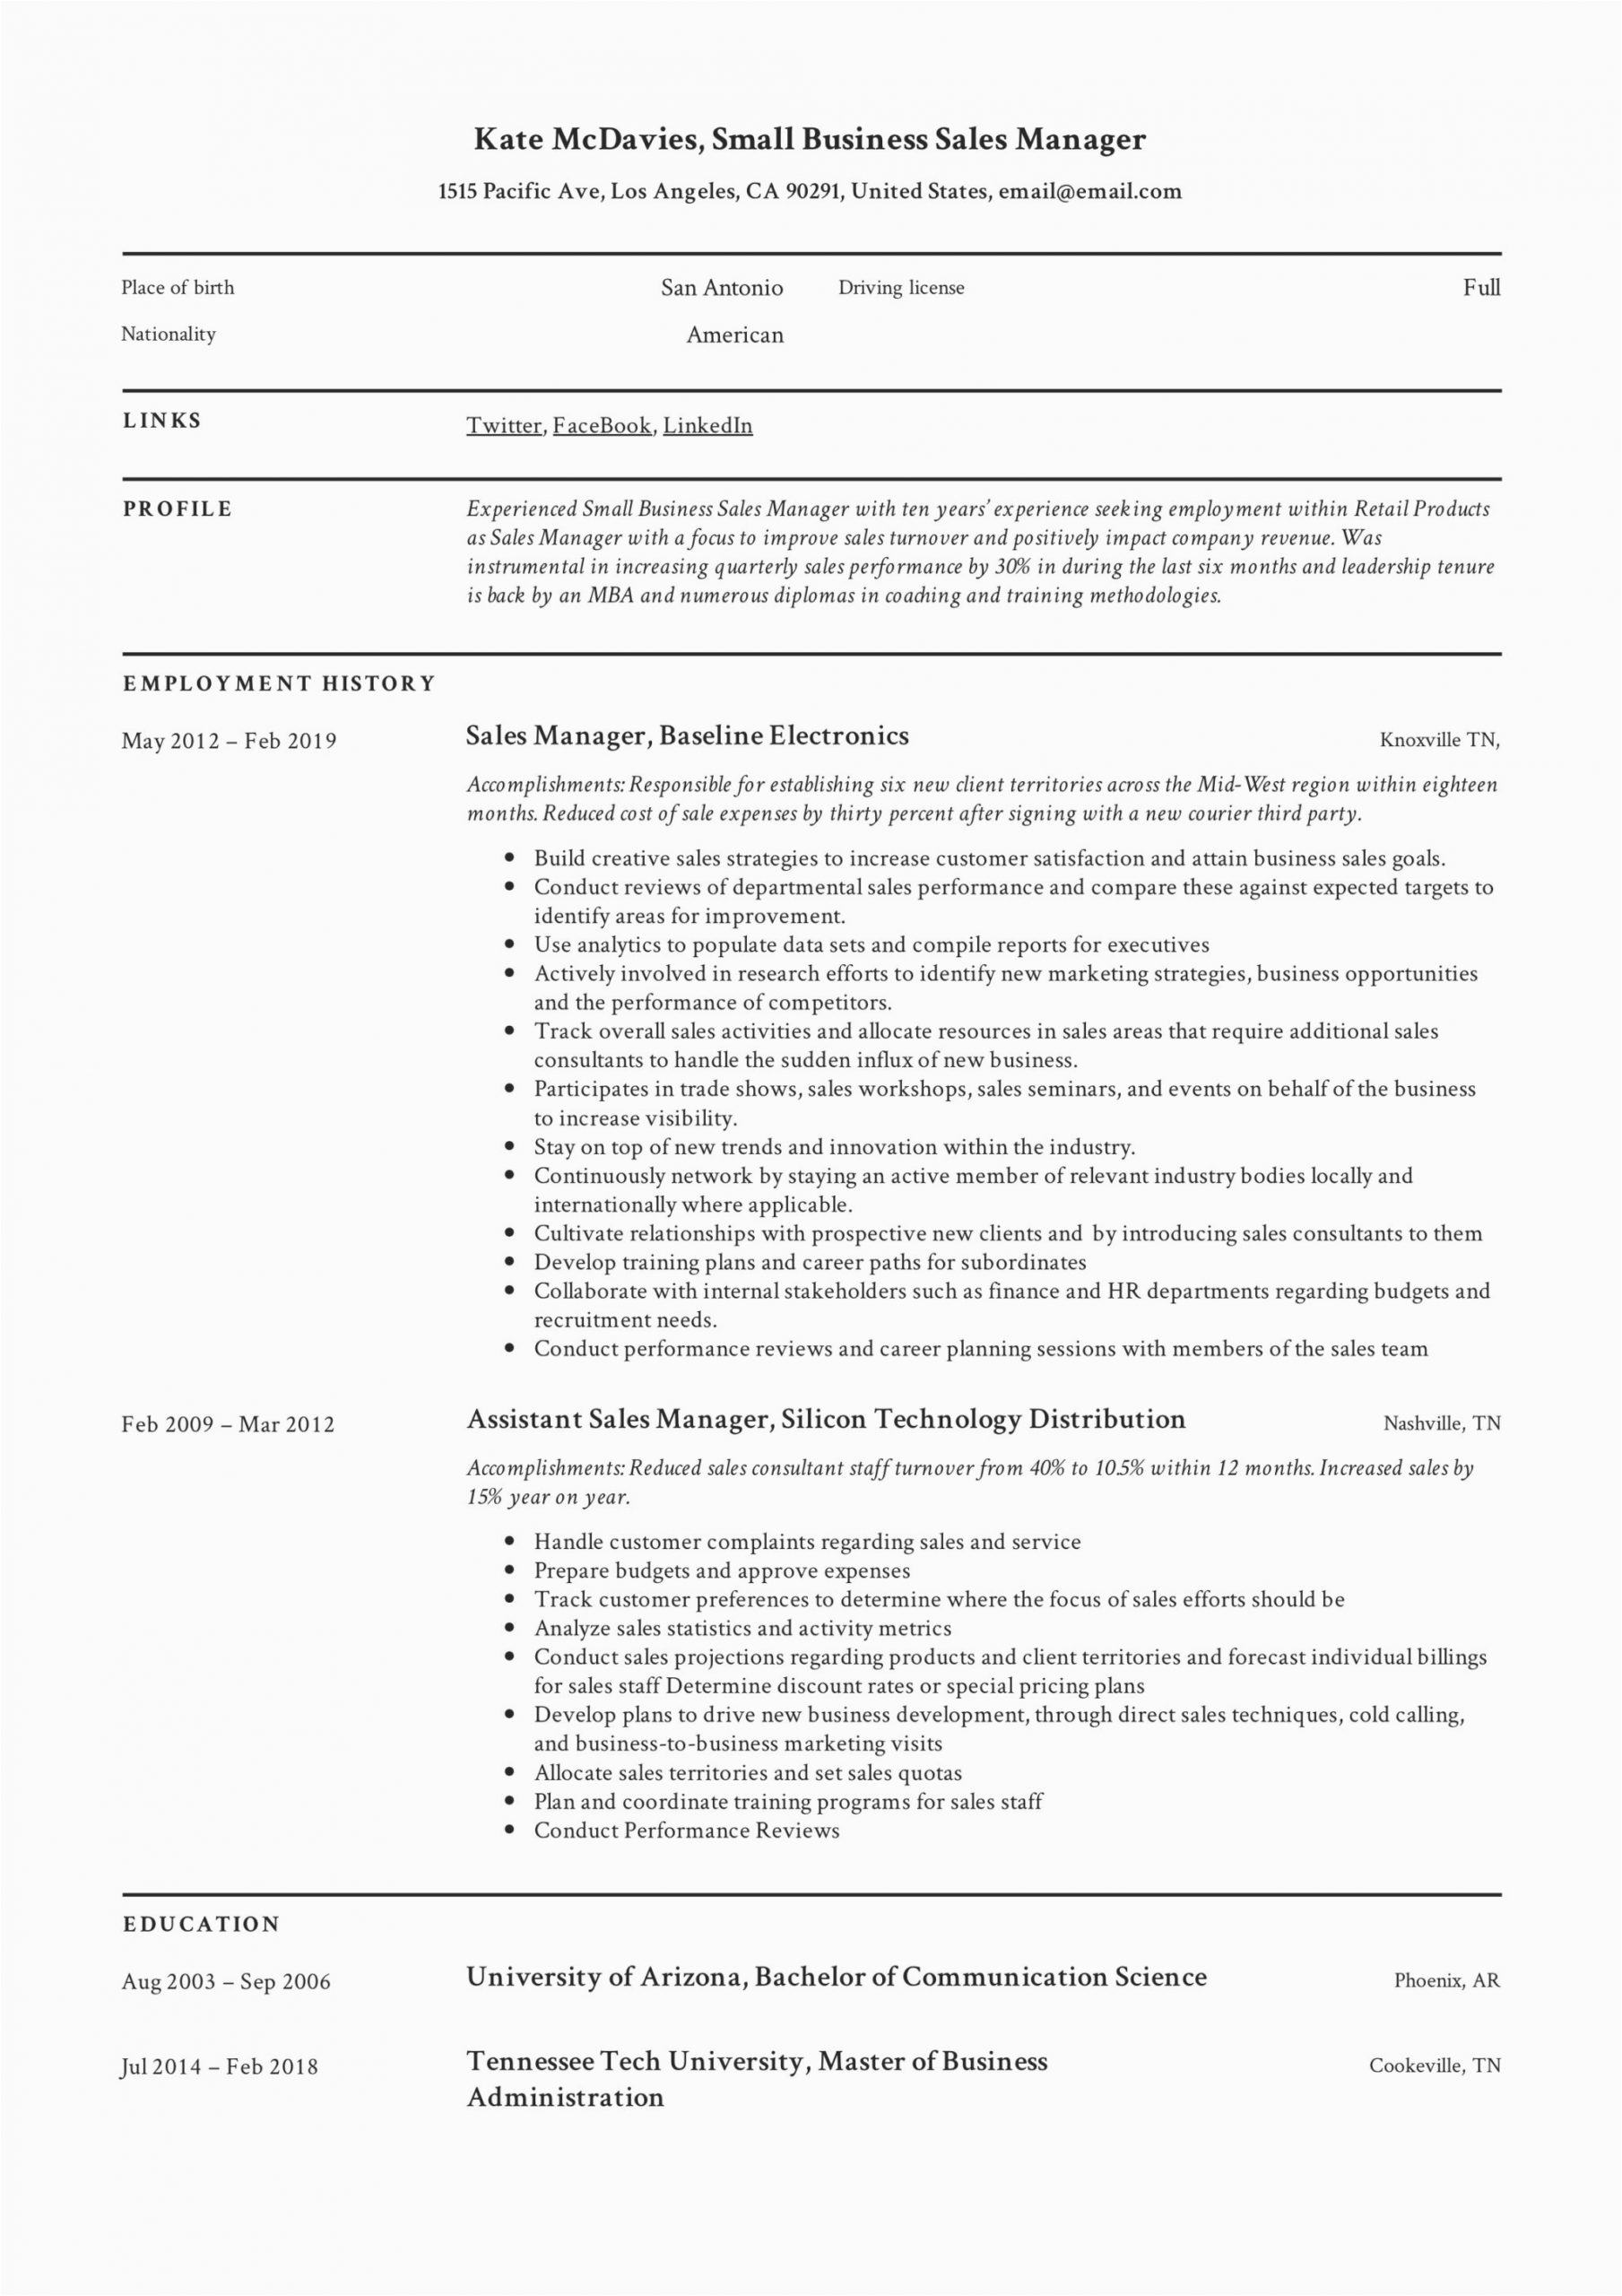 Business to Business Sales Resume Sample Guide Small Business Sales Manager Resume [x12] Sample